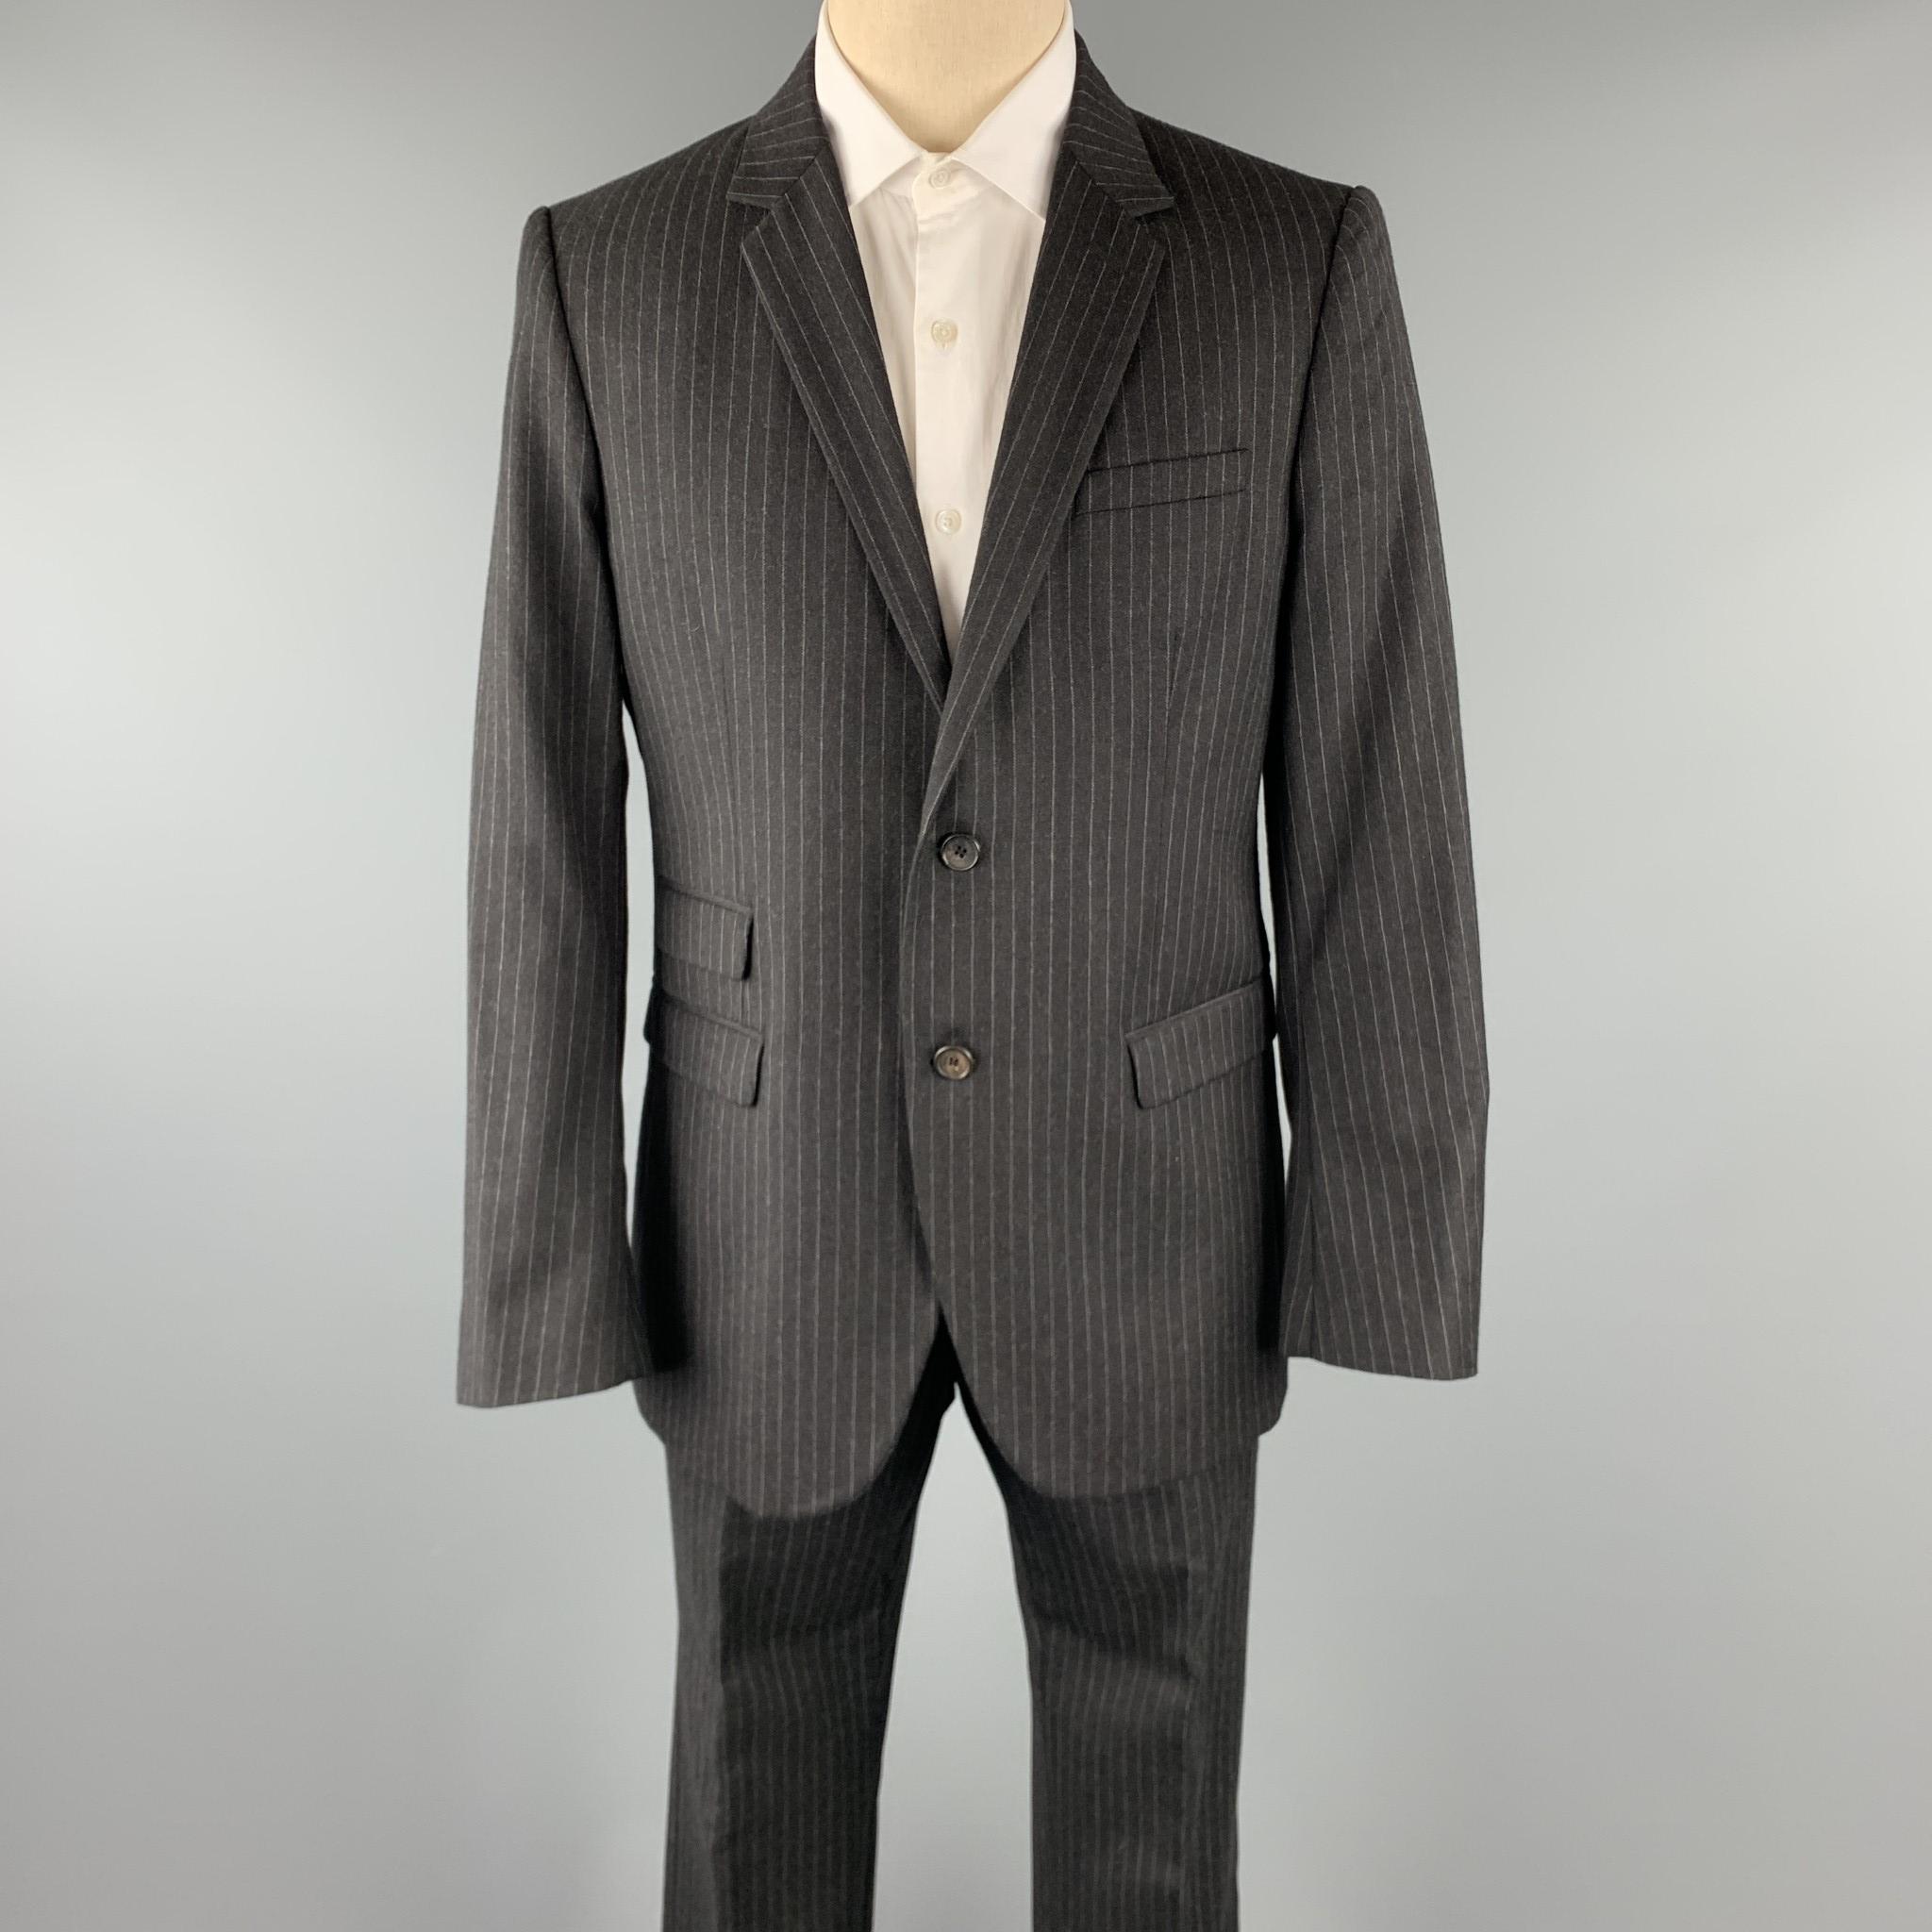 NEIL BARRETT suit comes in a charcoal stripe wool and includes a single breasted, two button sport coat with a notch lapel and matching flat front trousers. 

Excellent Pre-Owned Condition.
Marked: L

Measurements:

-Jacket
Shoulder: 17.5 in.